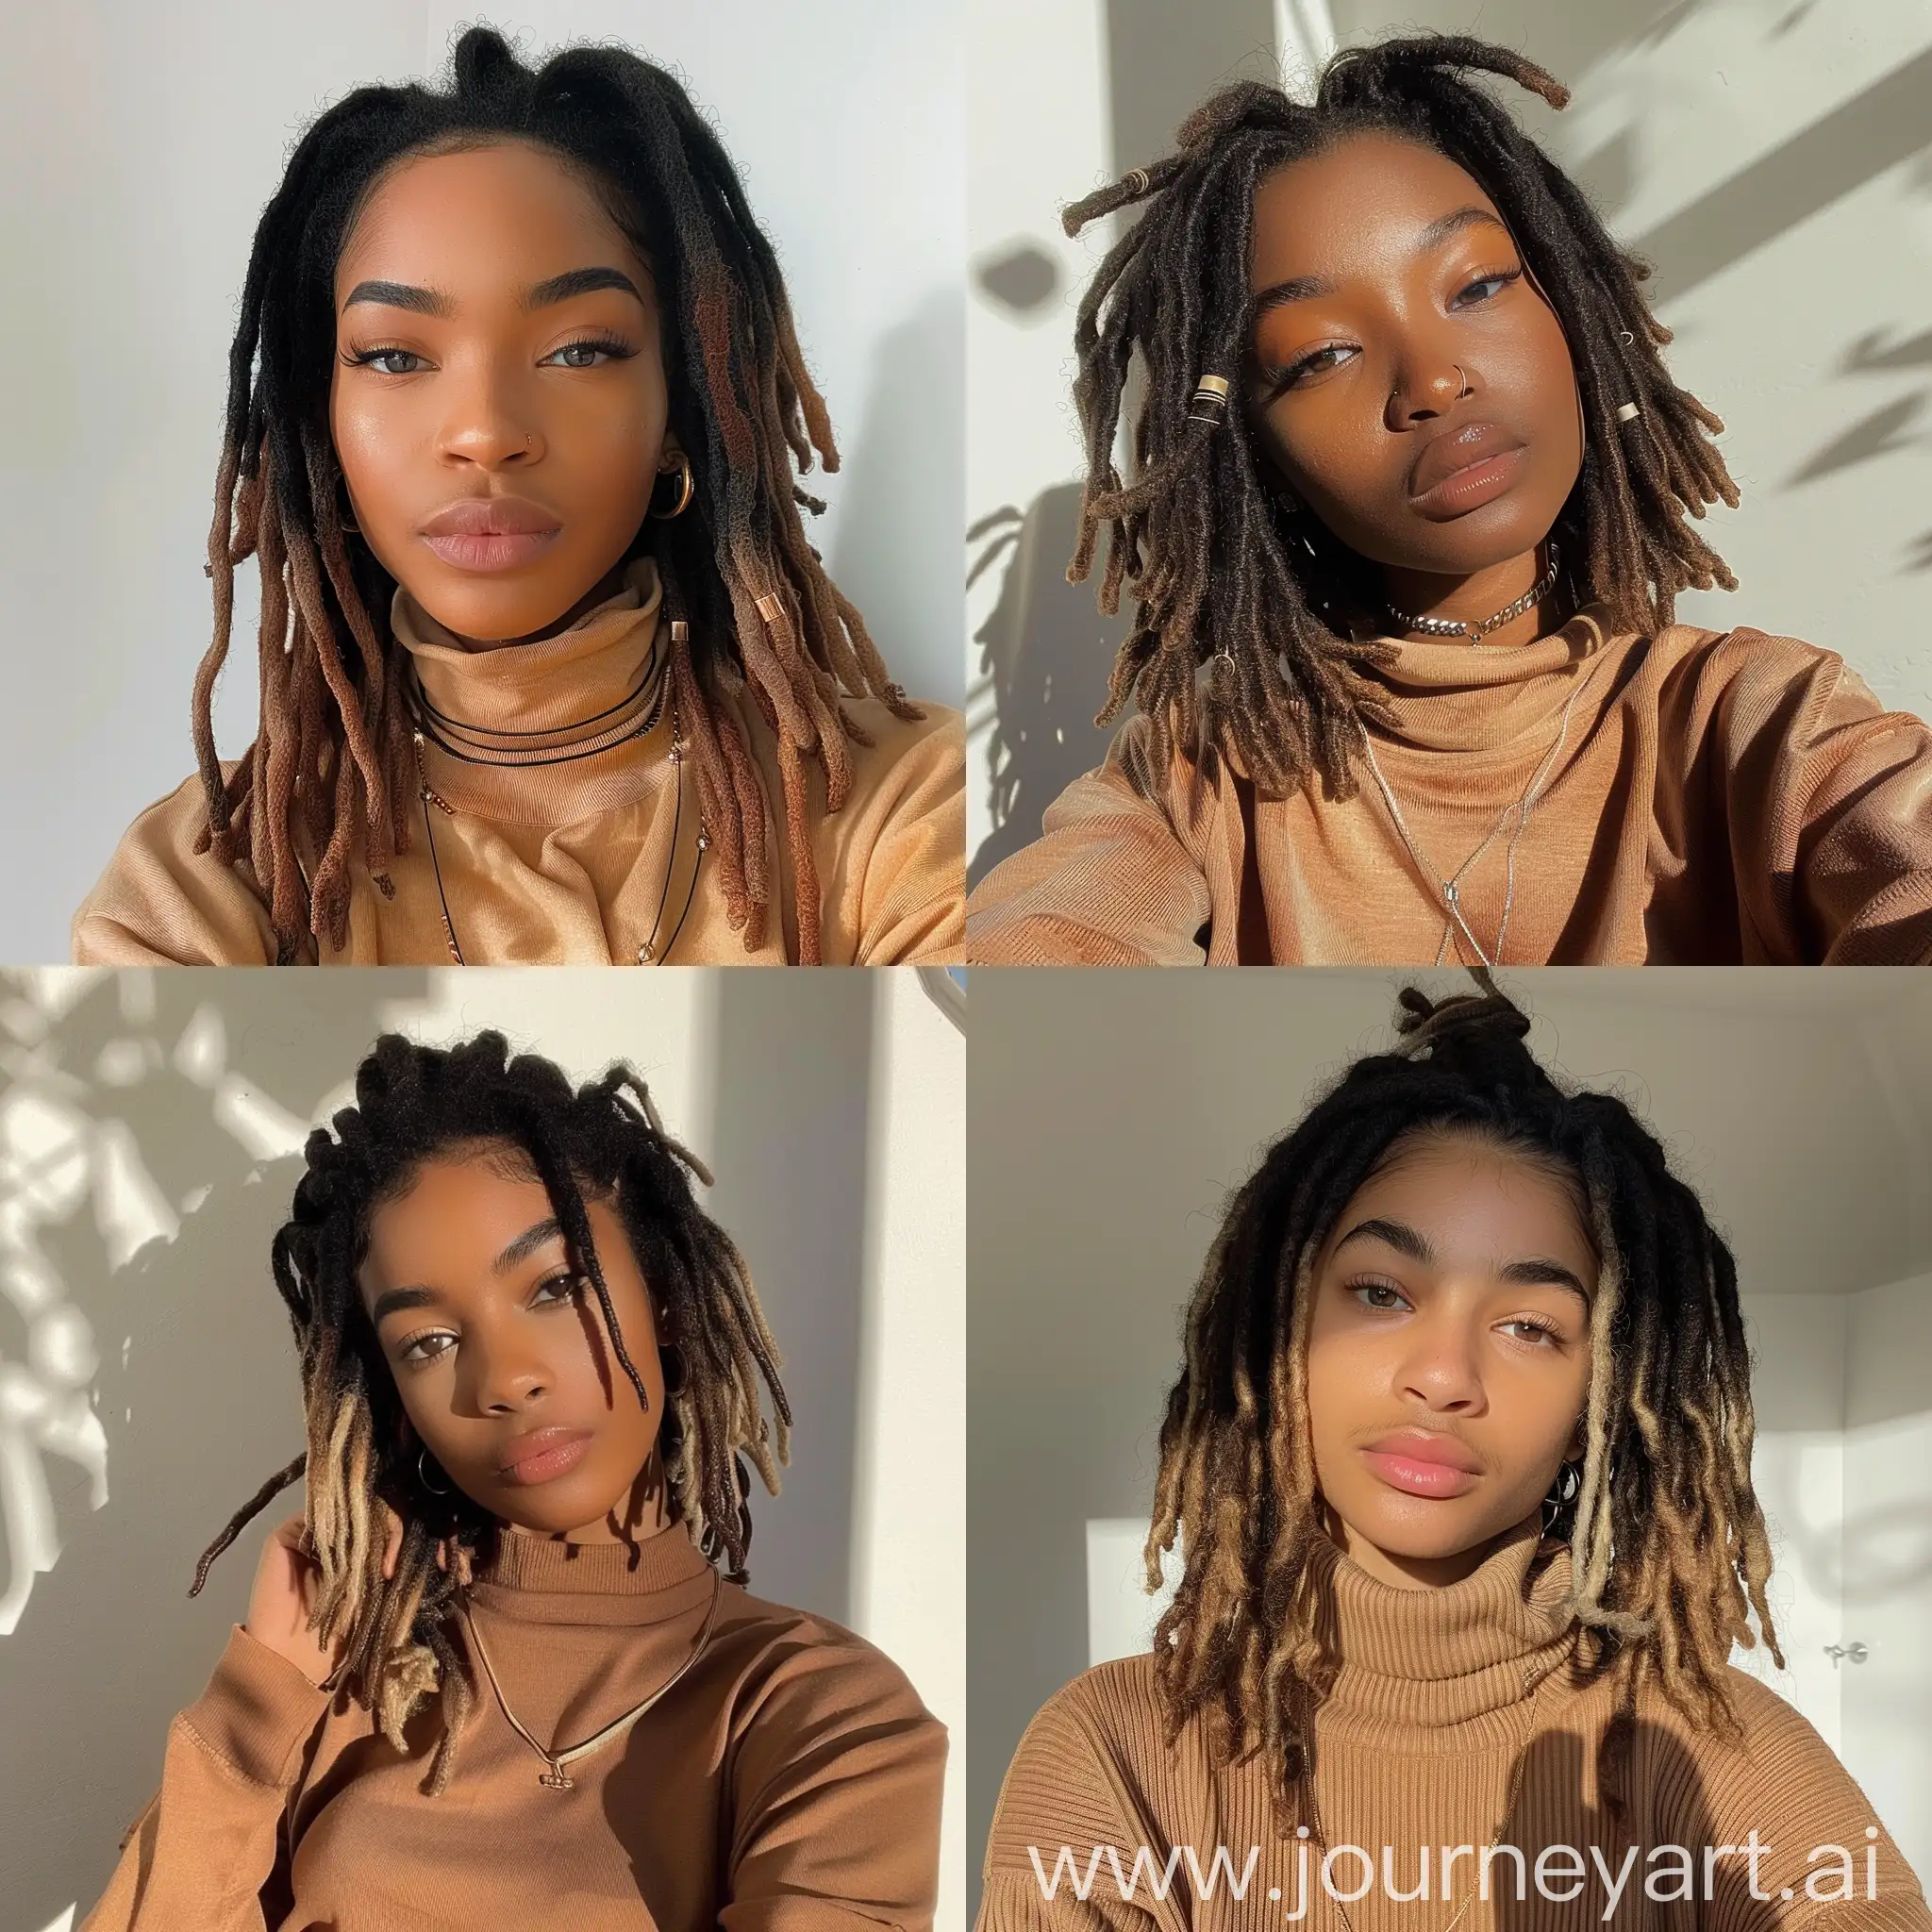 Aesthetic instagram selfie of a black teenage influencer with ombre dreadlocks, soft brown clothing color tones--ar 9:16